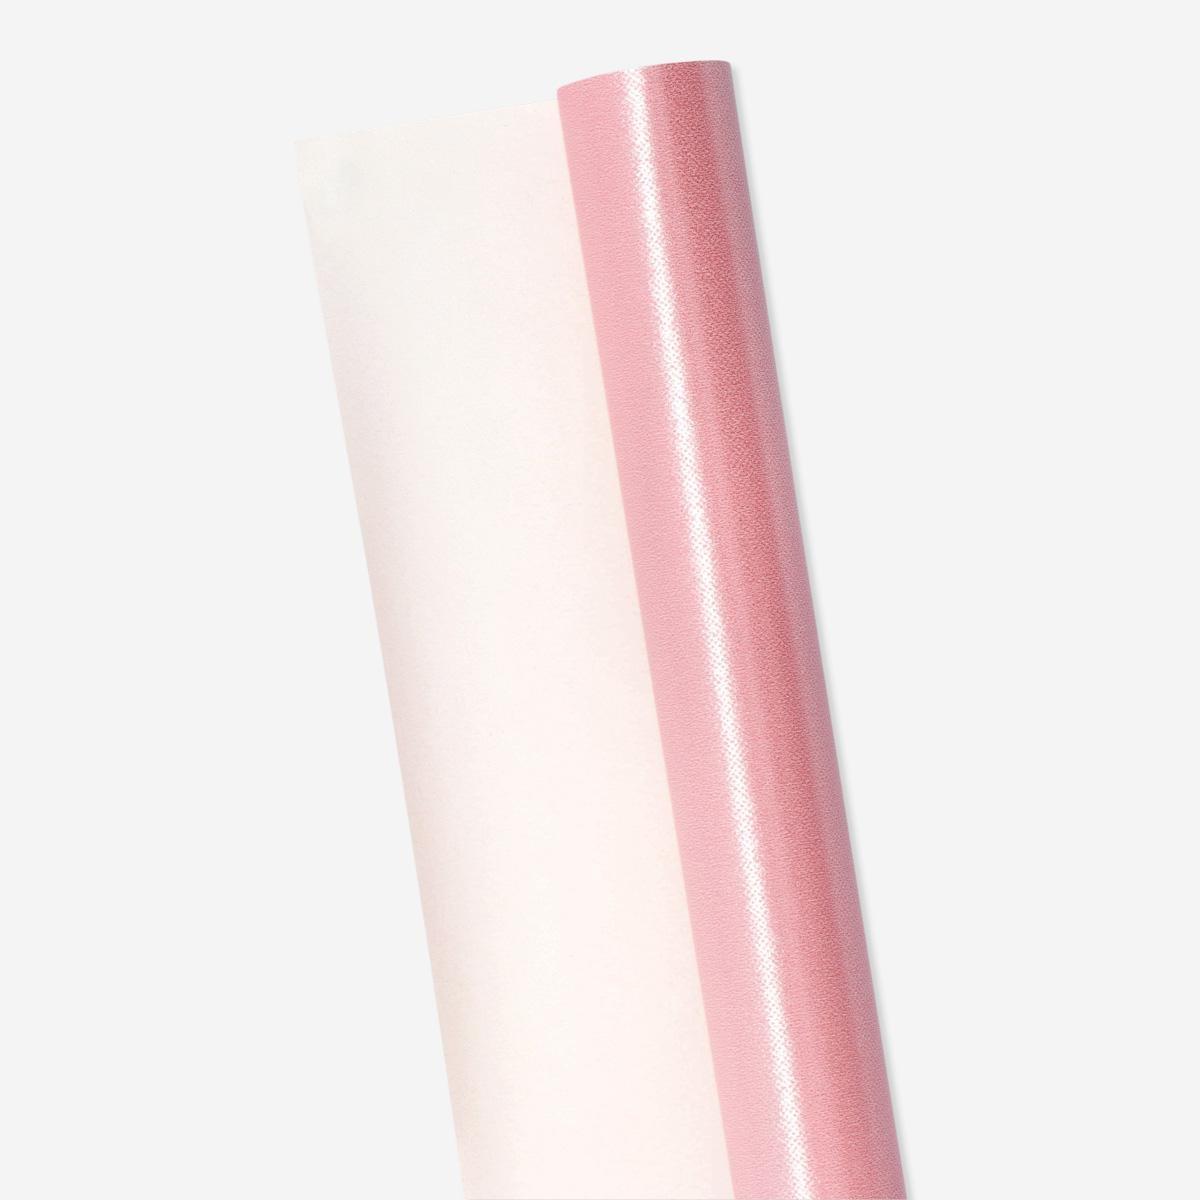 Pink wrapping paper